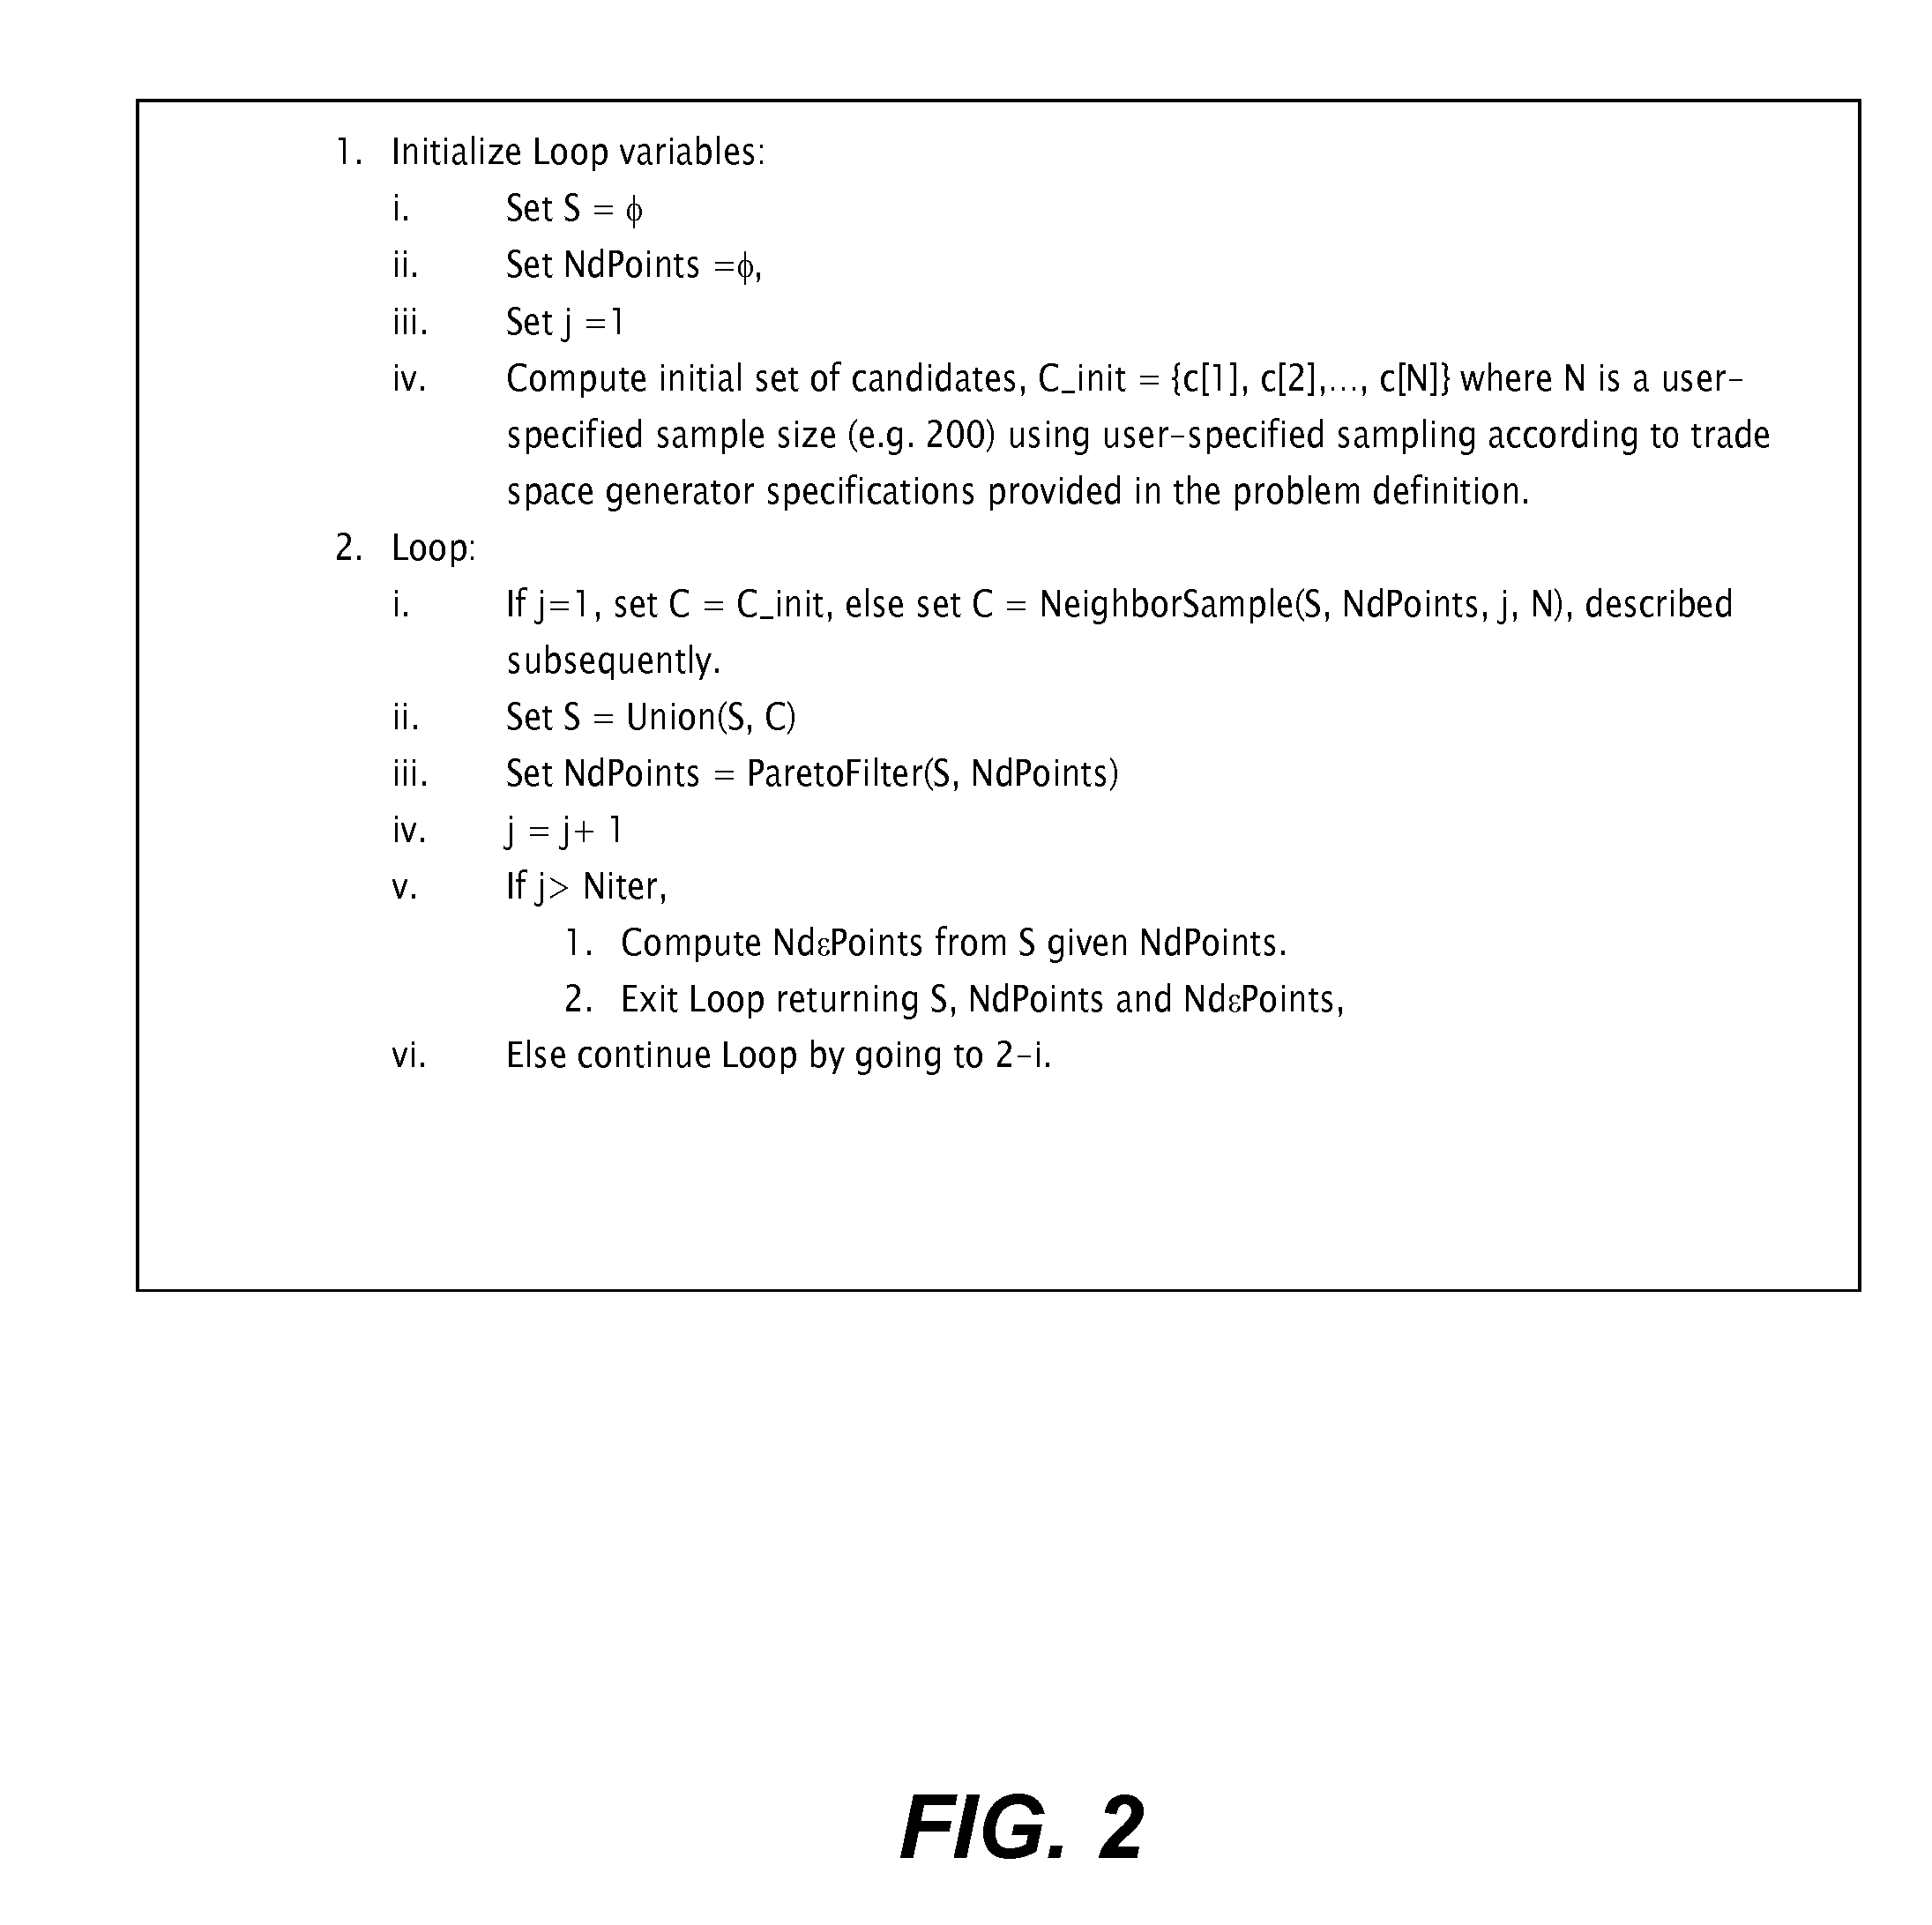 Multi-objective optimization within a constraint management system